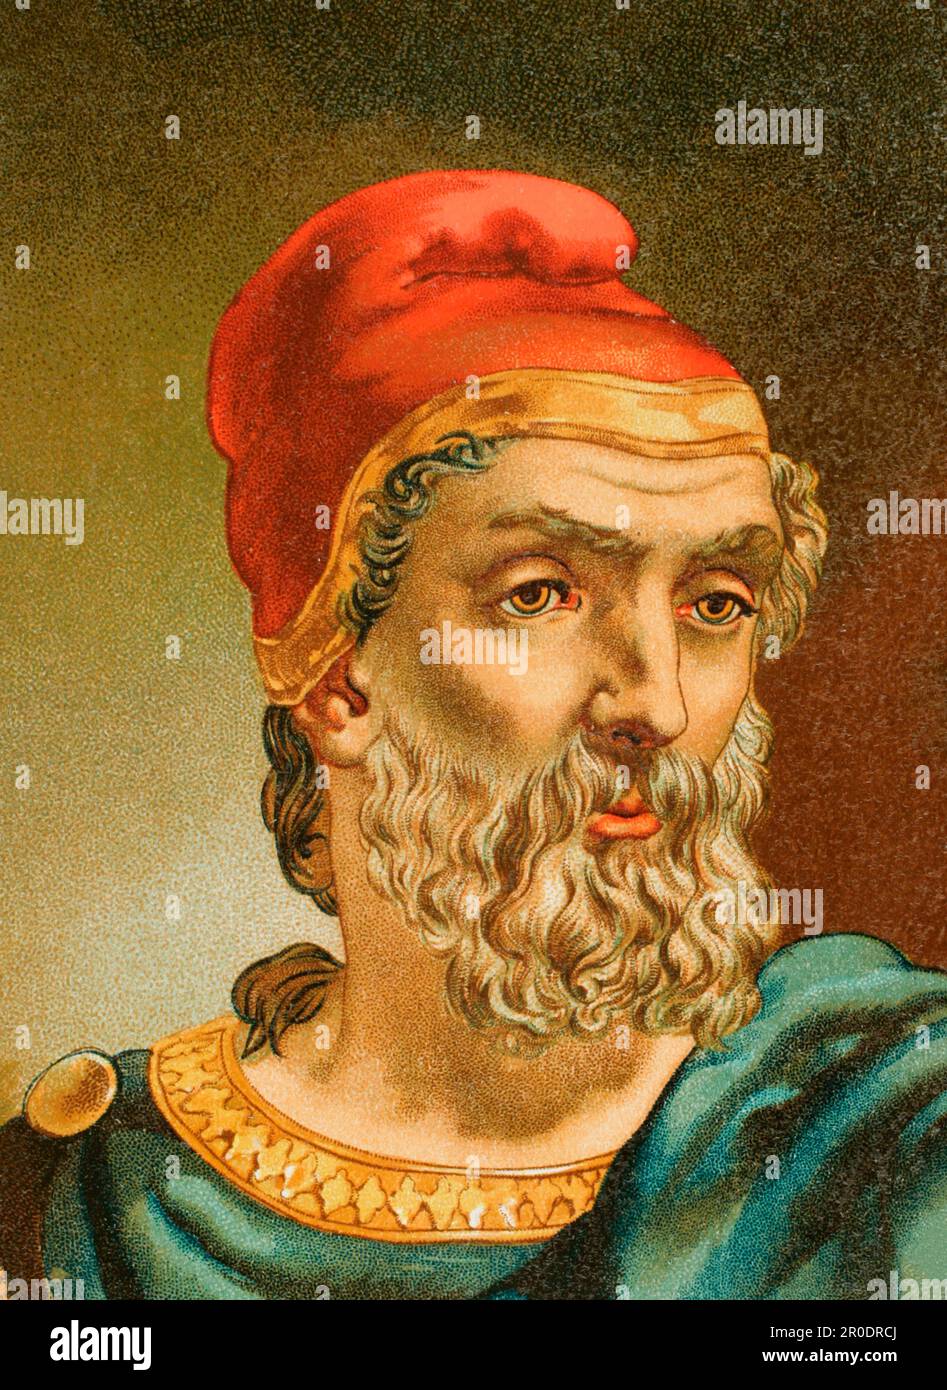 Archimedes (287 BC - 212 BC). Ancient Greek mathematician and inventor. Portrait. Chromolithography. Detail. 'Historia Universal' by César Cantú. Volume III, 1882. Stock Photo